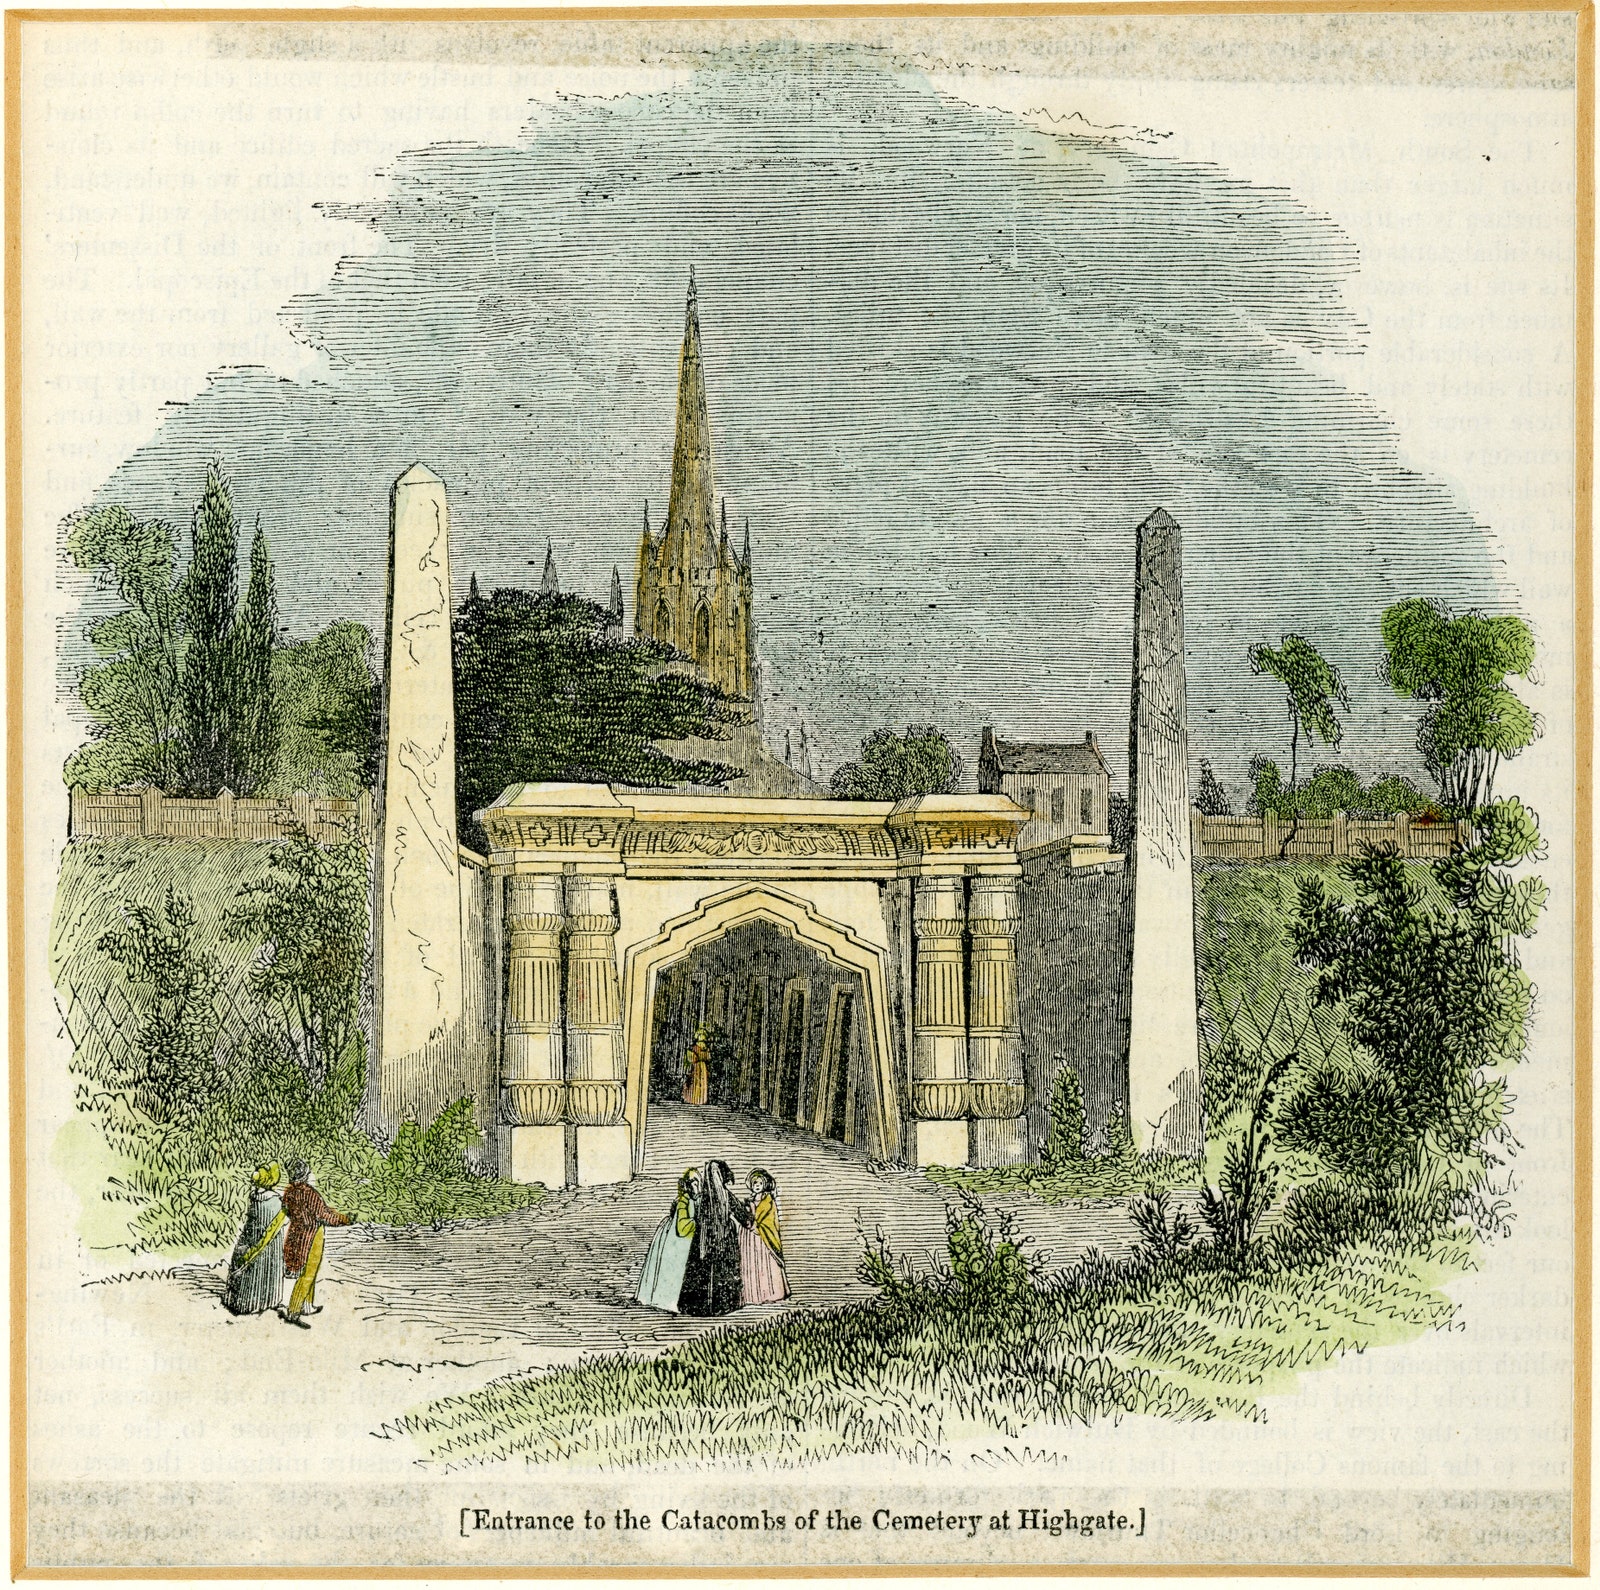 Entrance to the catacombs of the cemetery at Highgate